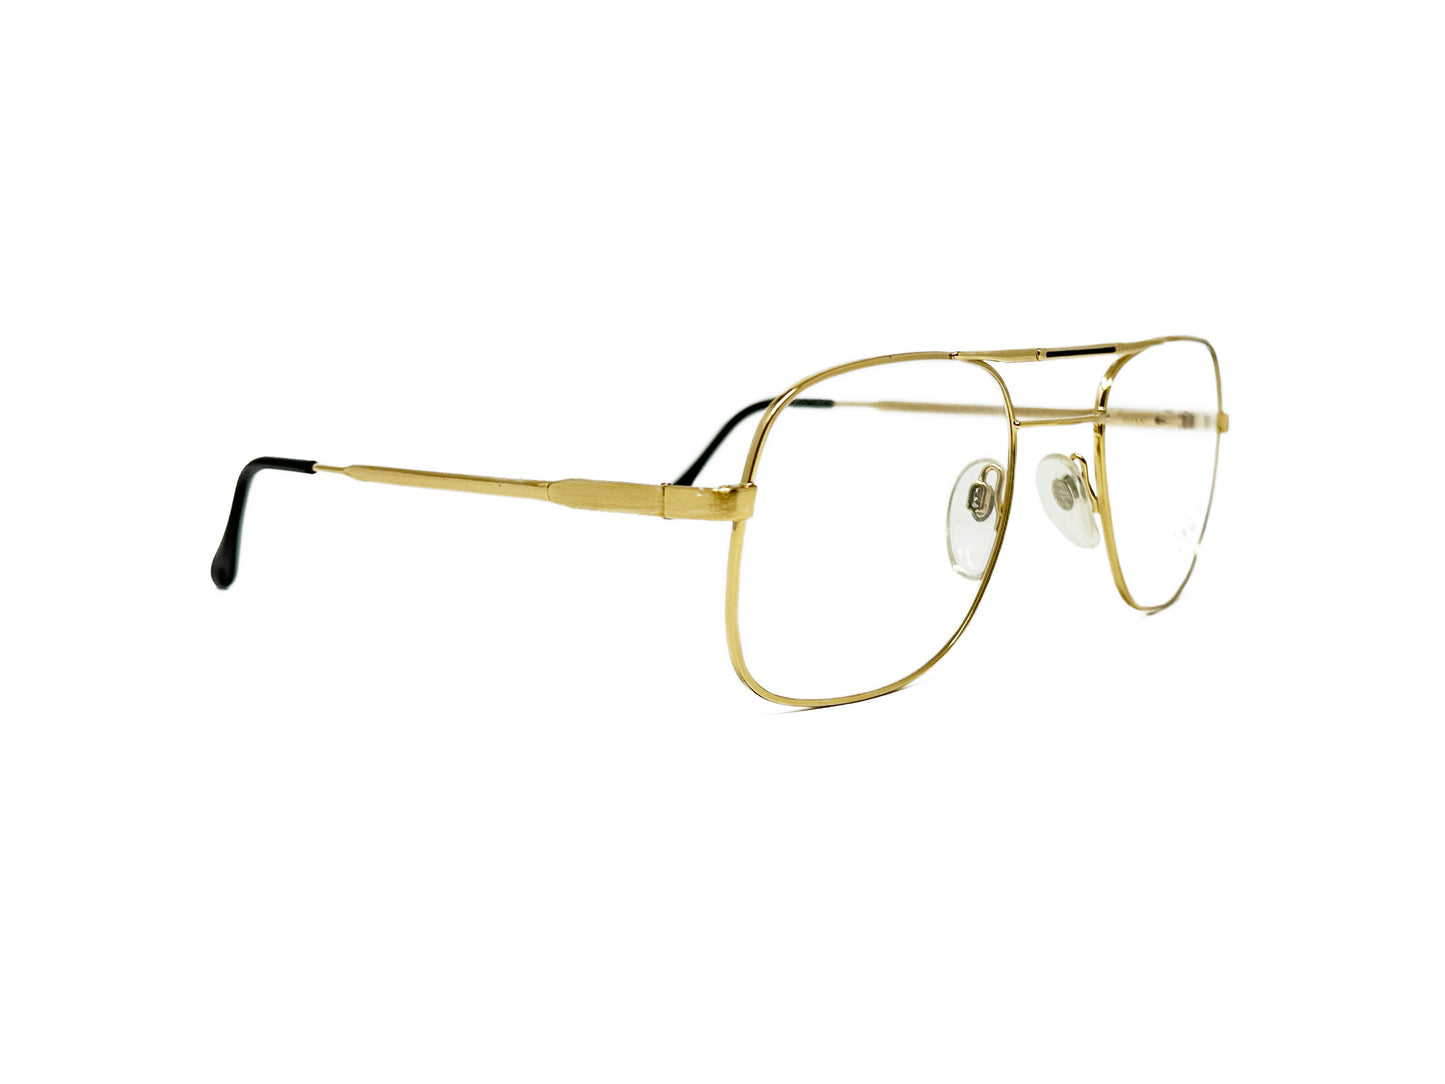 Luxottica metal, flat-top, metal aviator optical frame with extra side bridge. Model: Kuxx Aviator. Color: GEP - Gold. Side view.